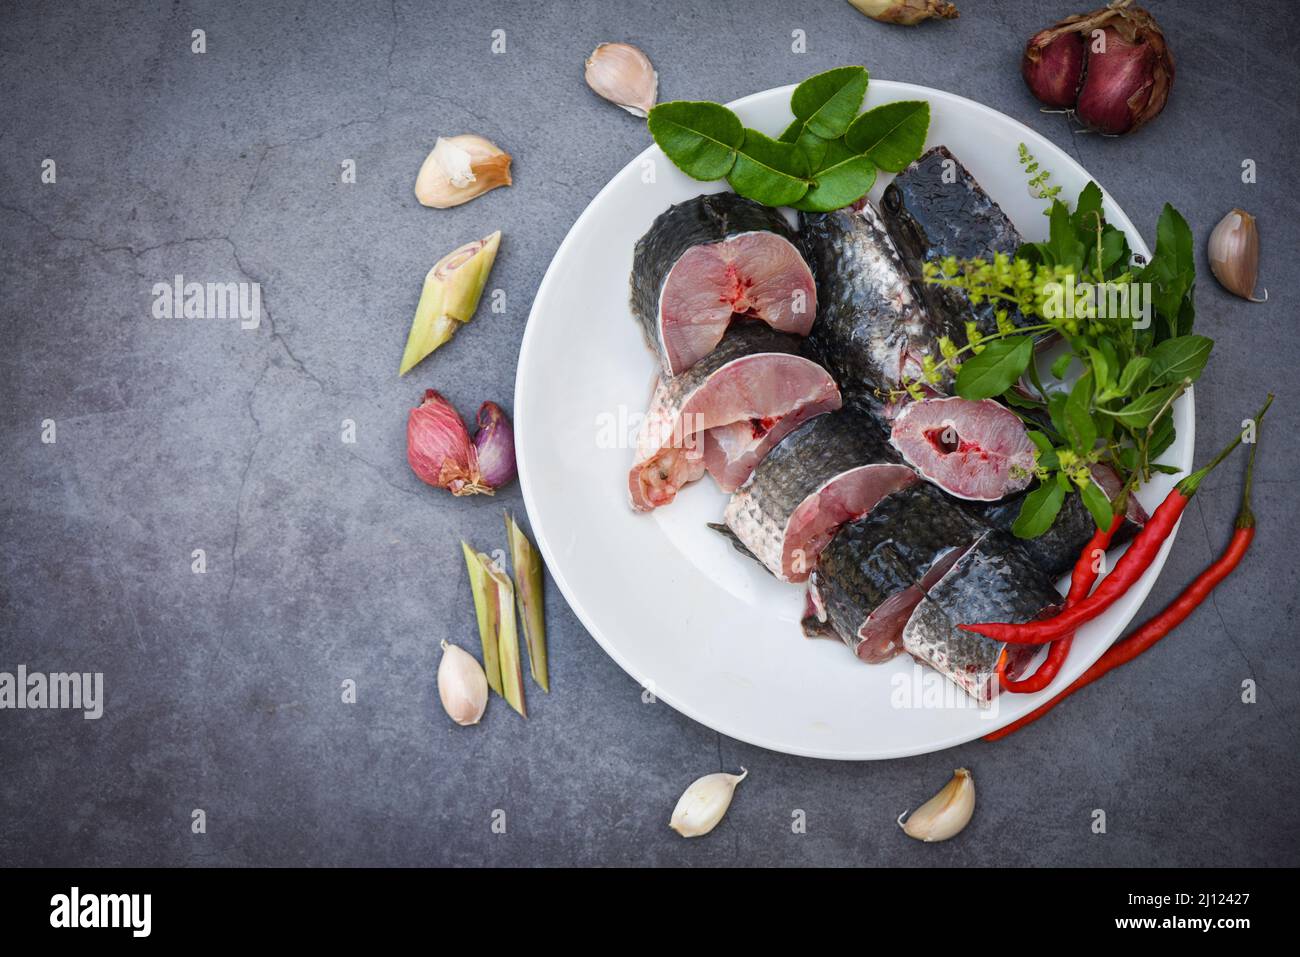 Snakehead fish for cooking food, striped snakehead fish chopped with ingredients herb and spices on white plate and table kitchen background, Fresh ra Stock Photo